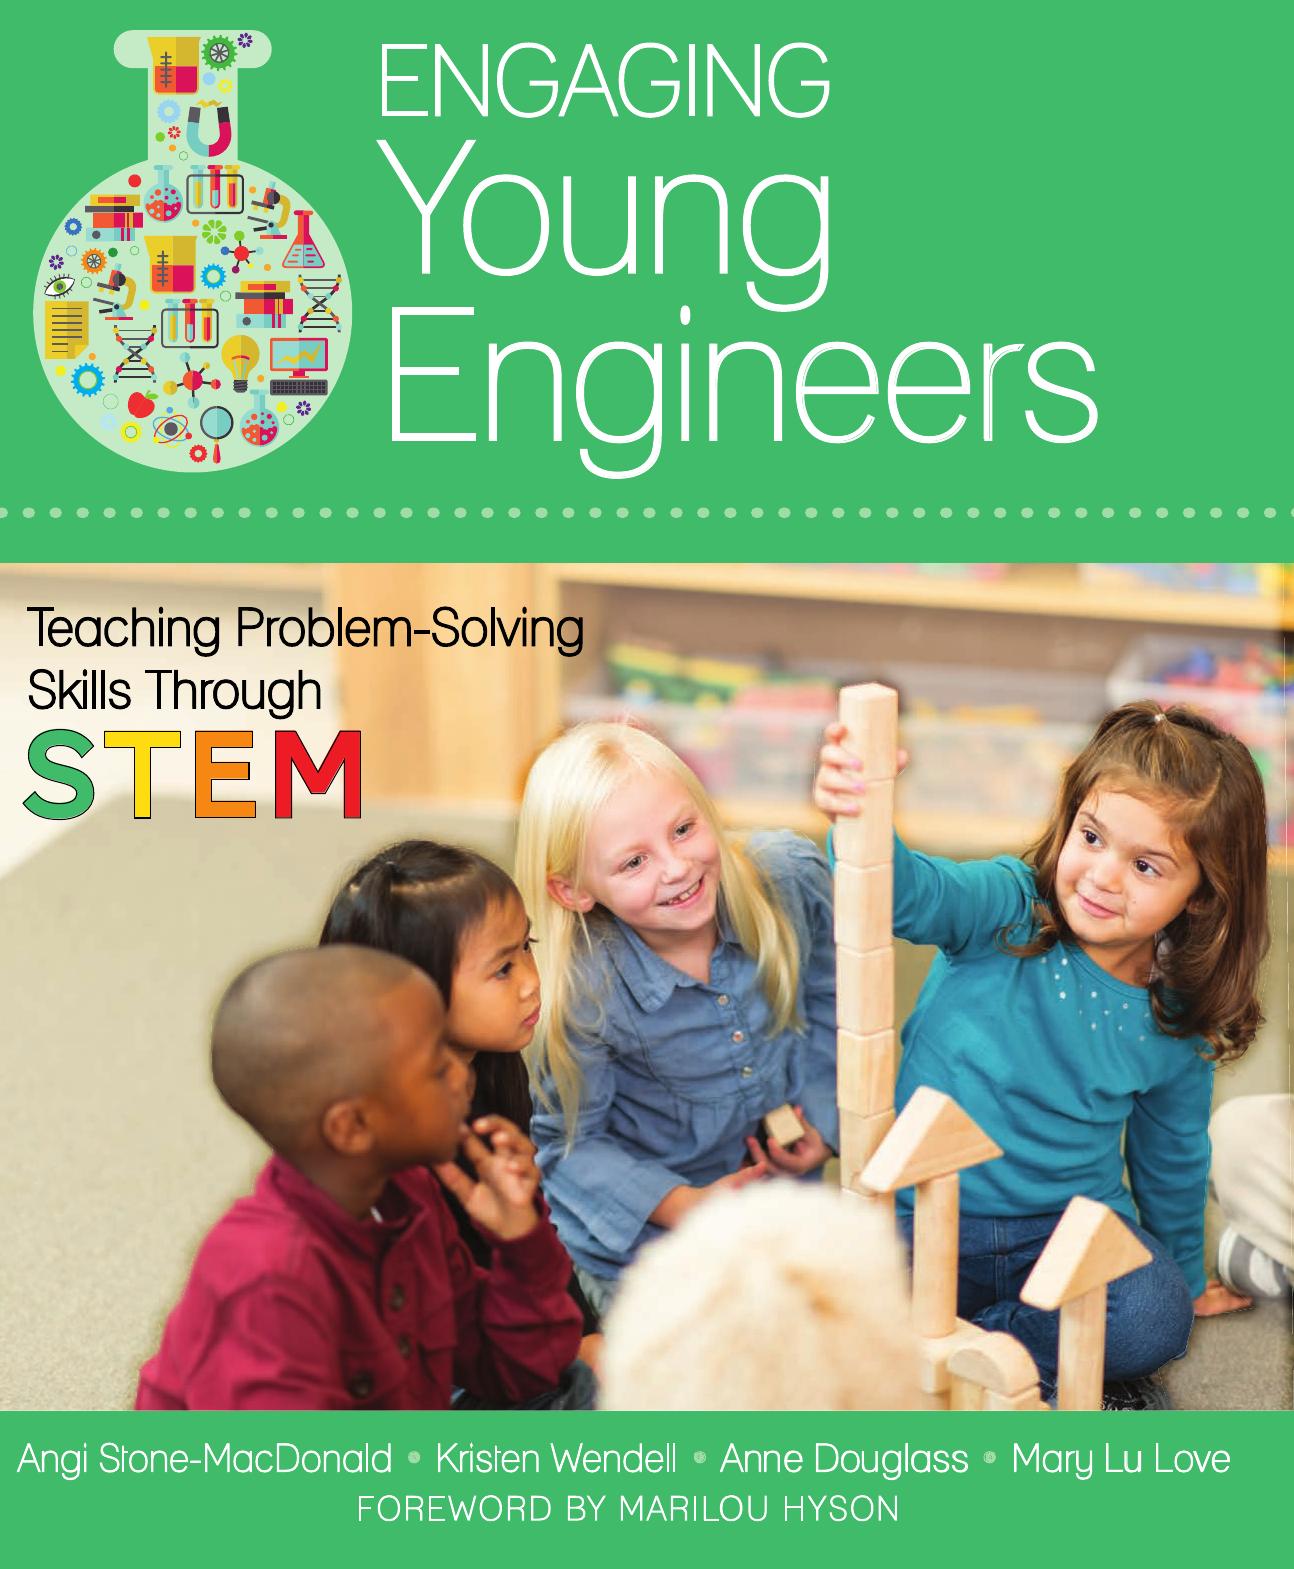 Engaging Young Engineers